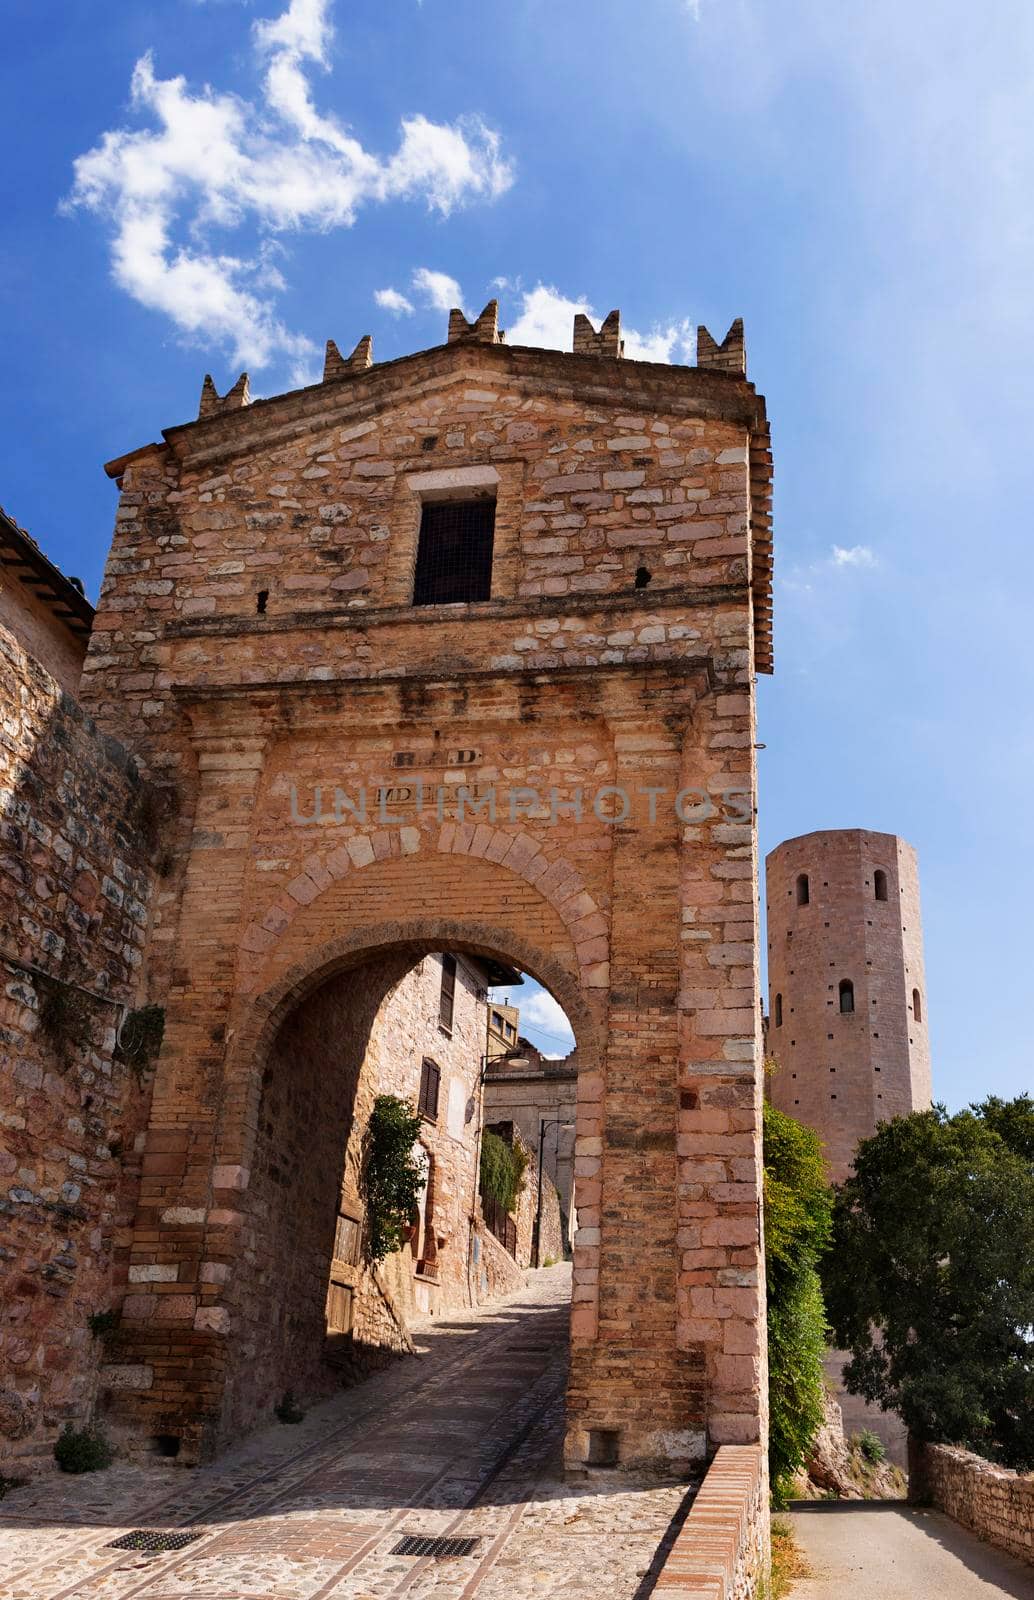 Venus gate in Spello with one Properzio tower in the background , beautiful old medieval walled town